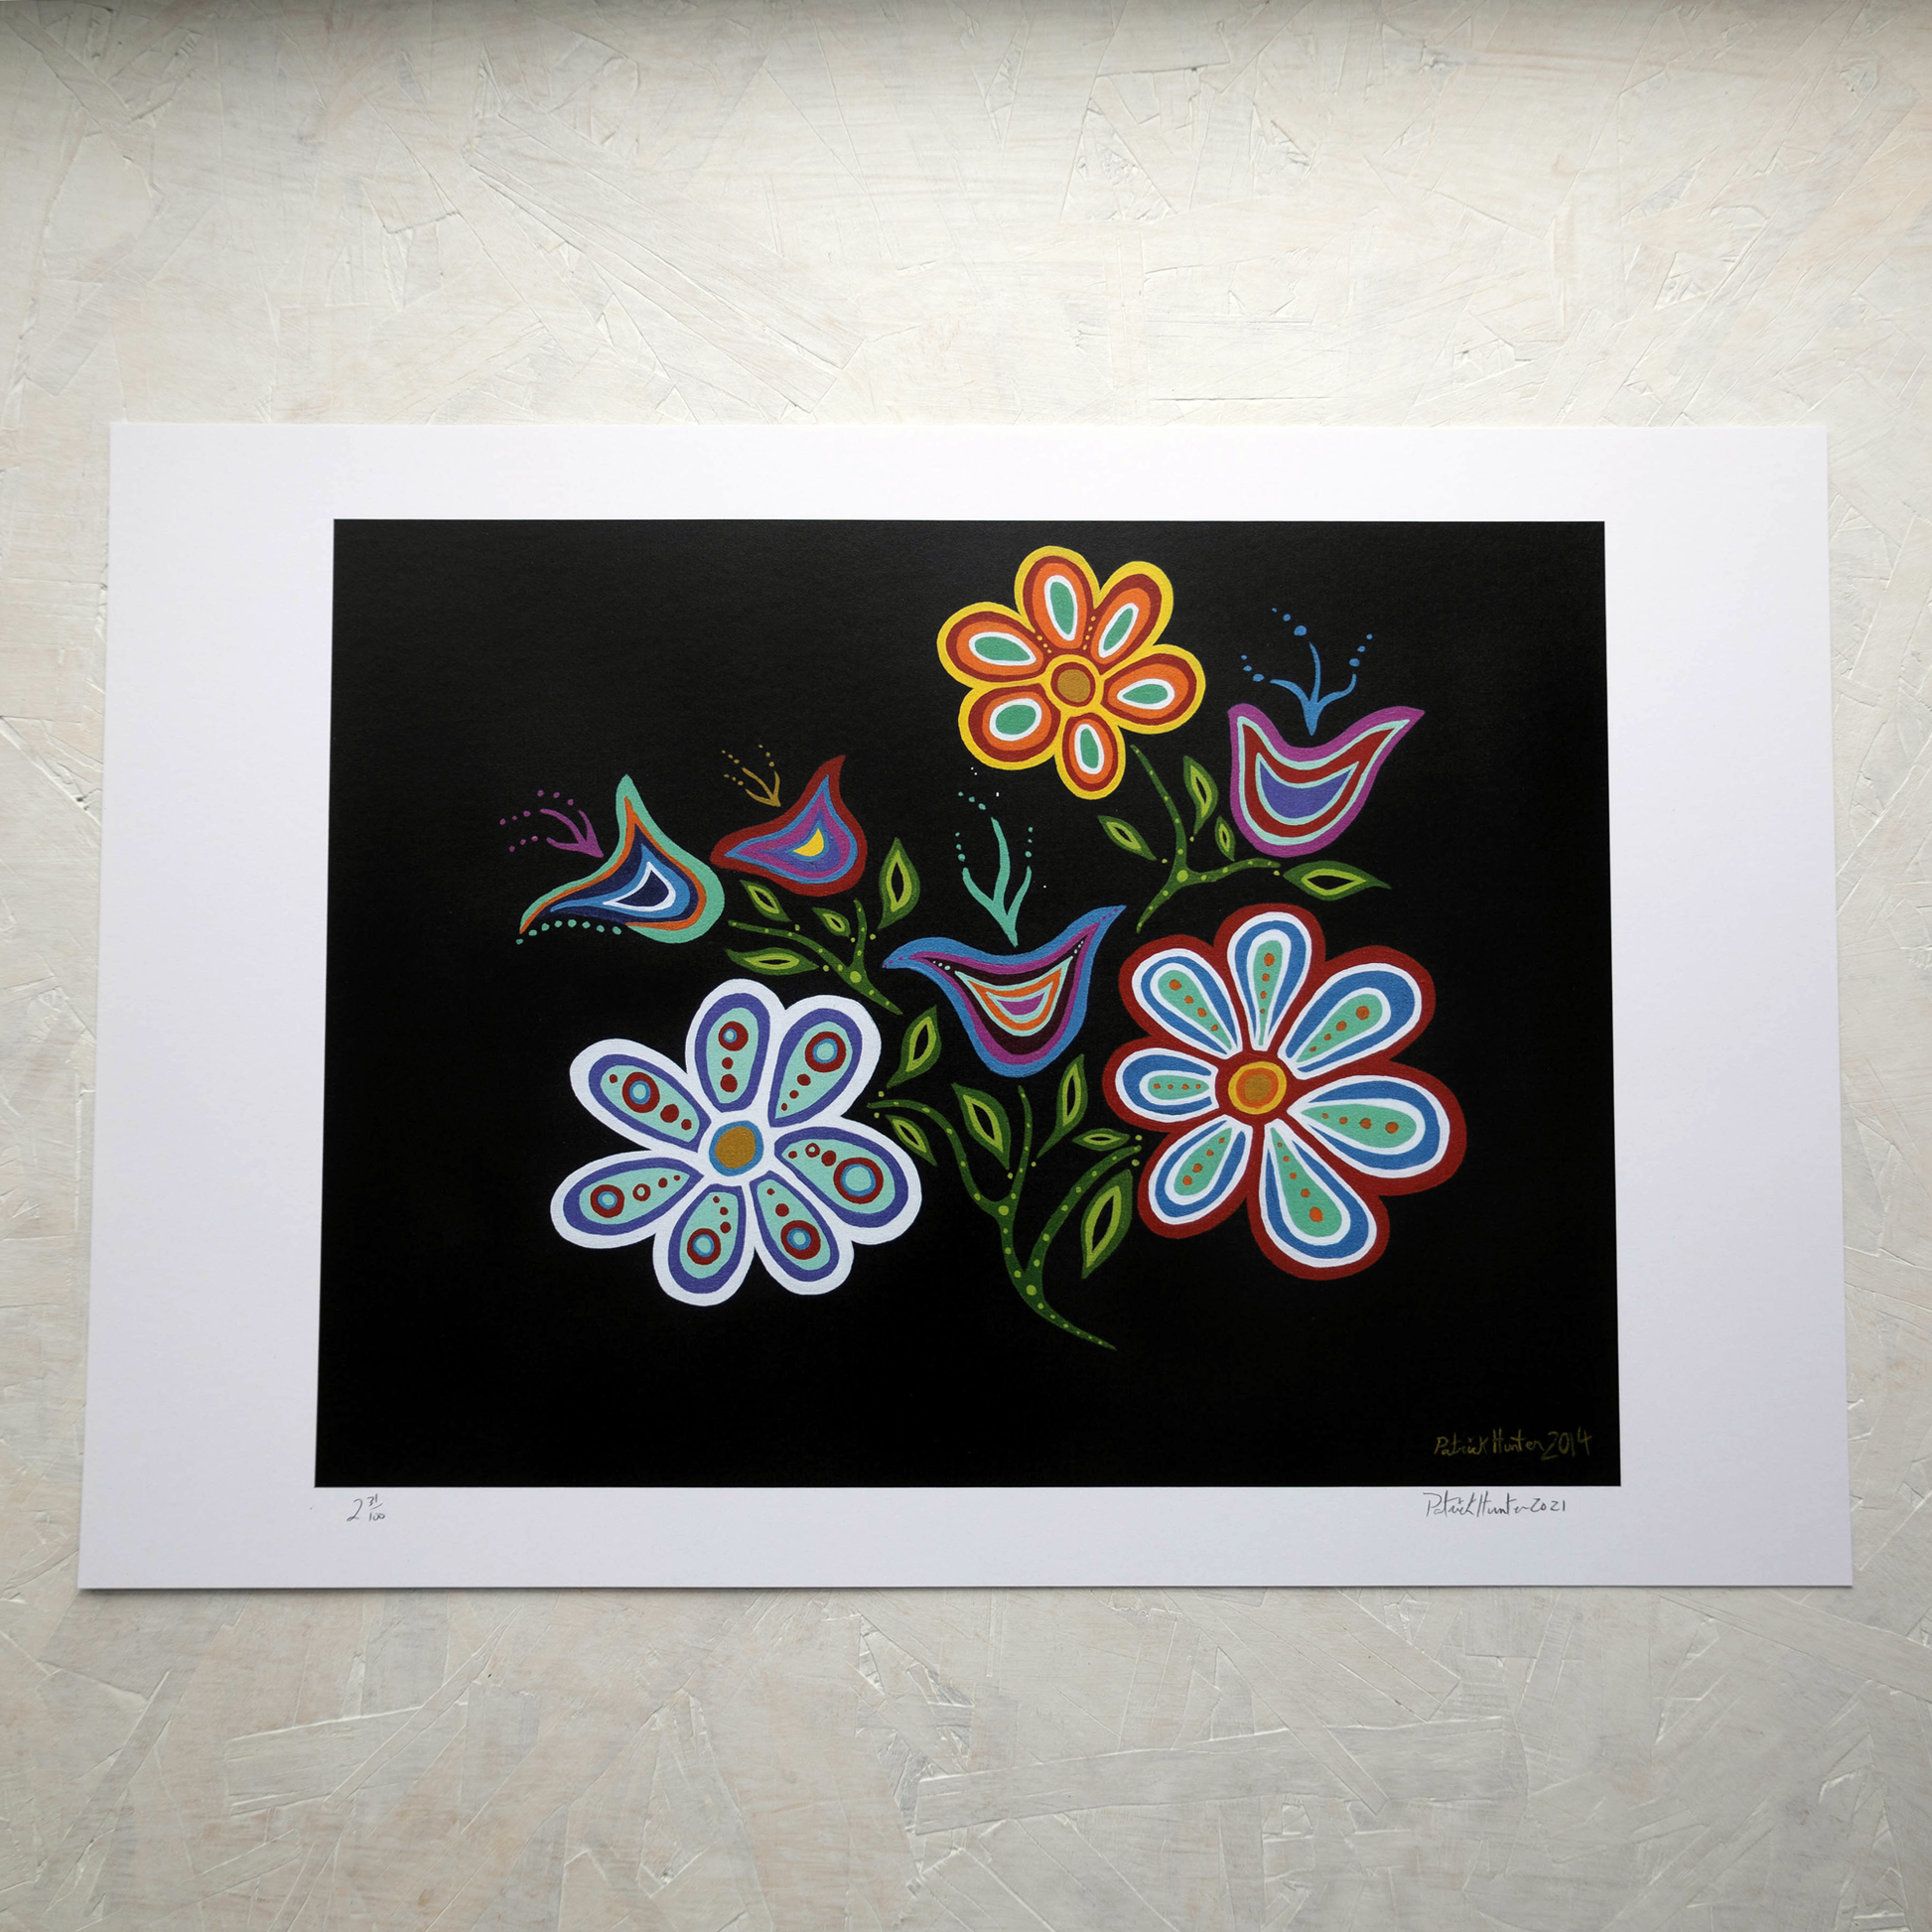 Print of Patrick Hunter's painting of bright flowers in woodland art style on a black backhround.